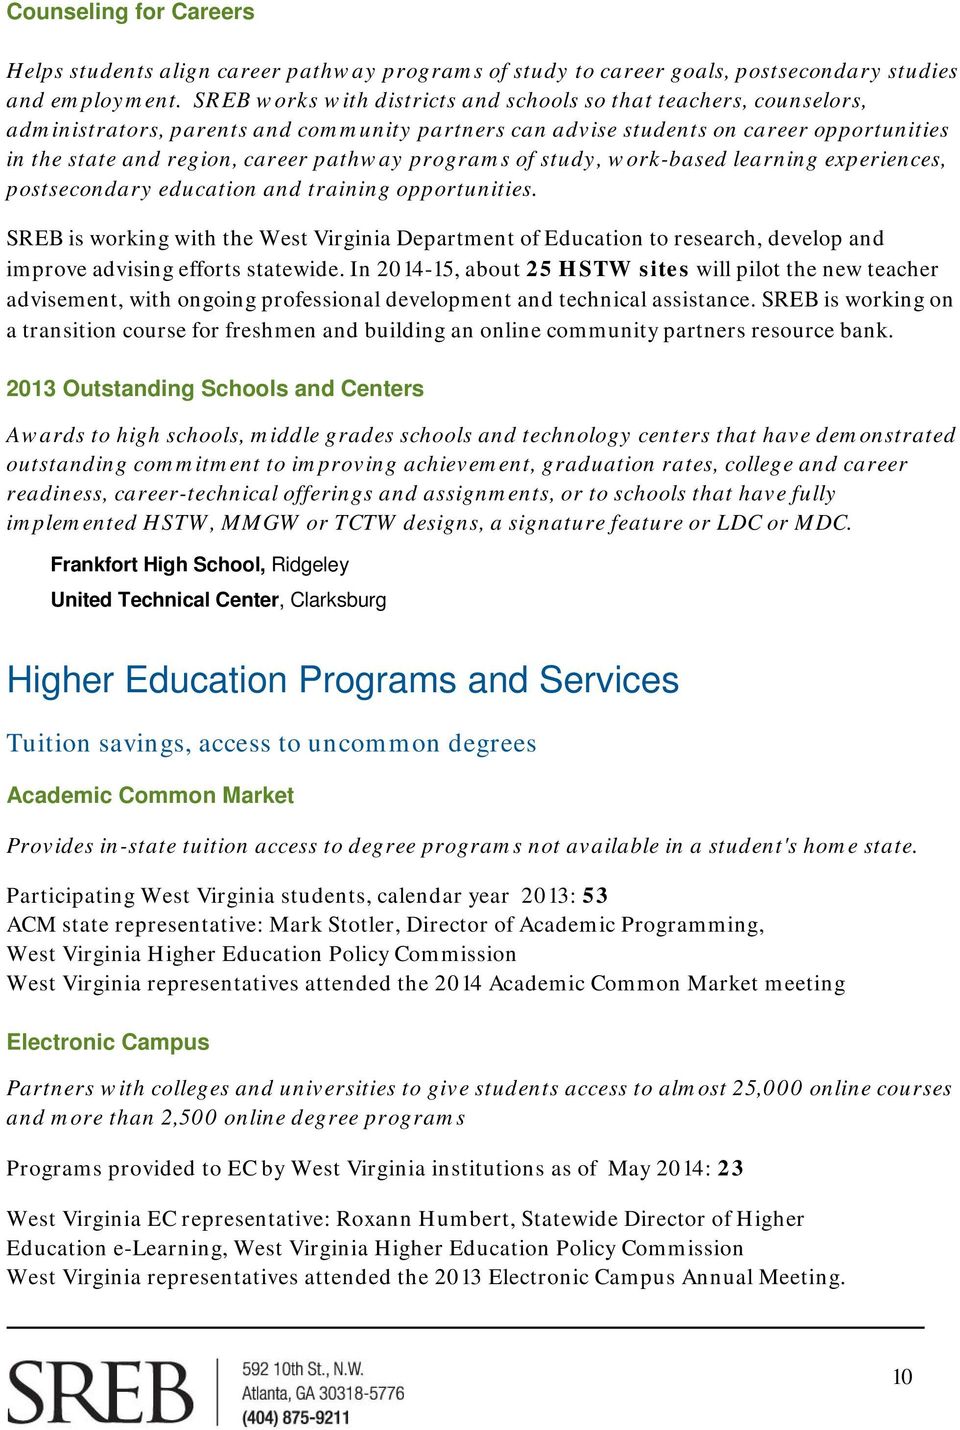 programs of study, work-based learning experiences, postsecondary education and training opportunities.